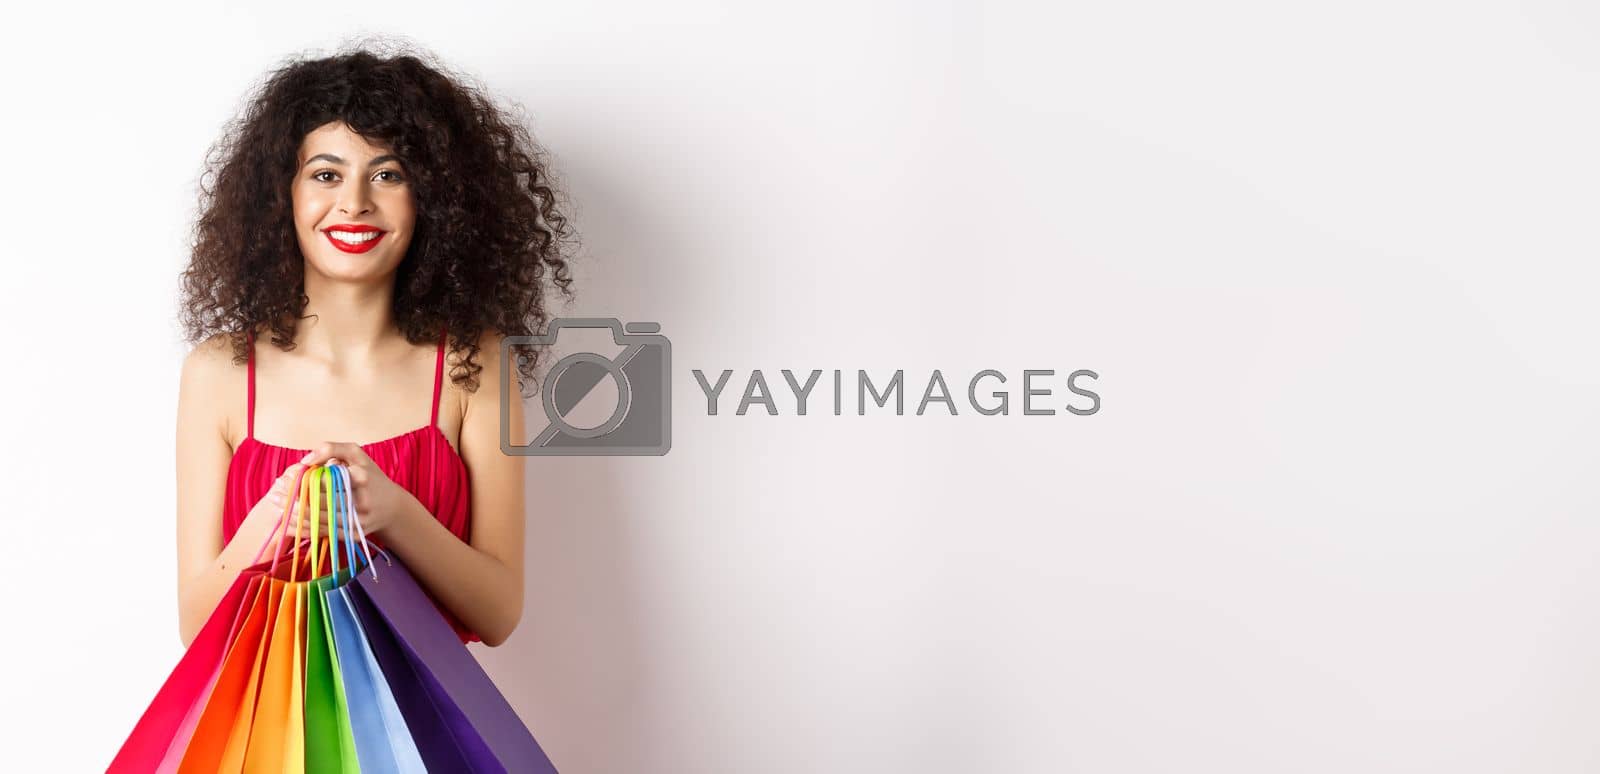 Royalty free image of Image of stylish caucasian woman in red dress and makeup, holding shopping bags and smiling, standing over white background by Benzoix